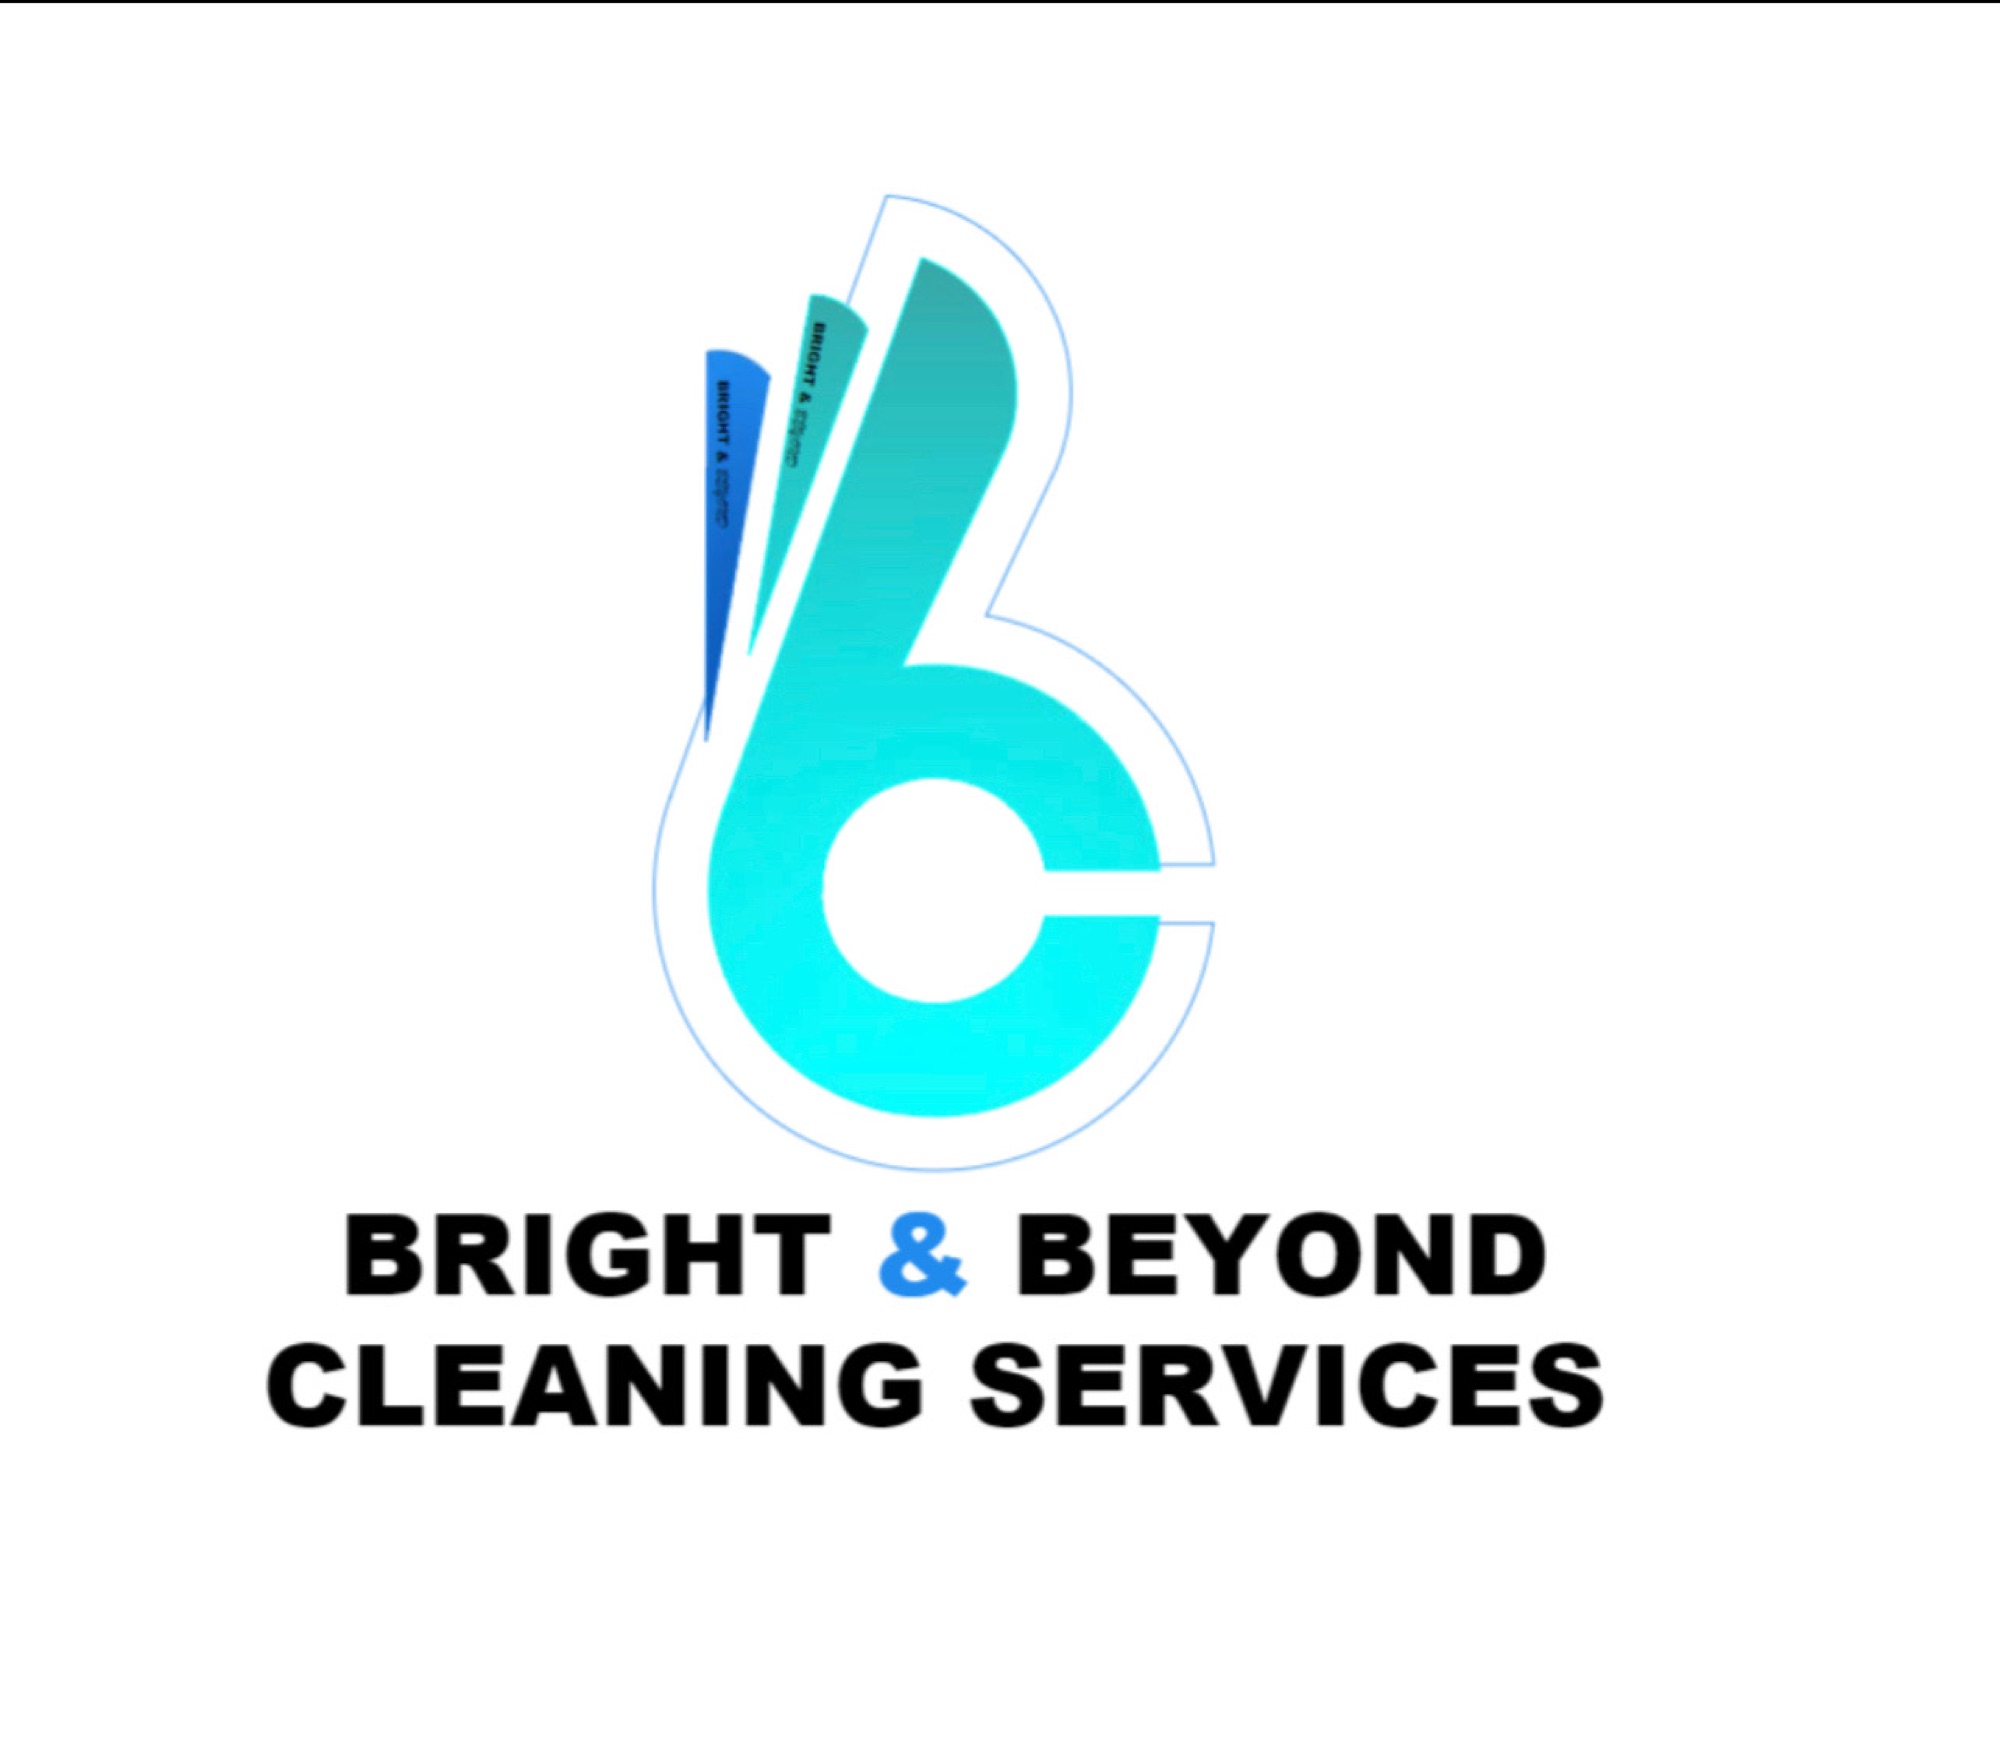 Bright & Beyond Cleaning Services Logo